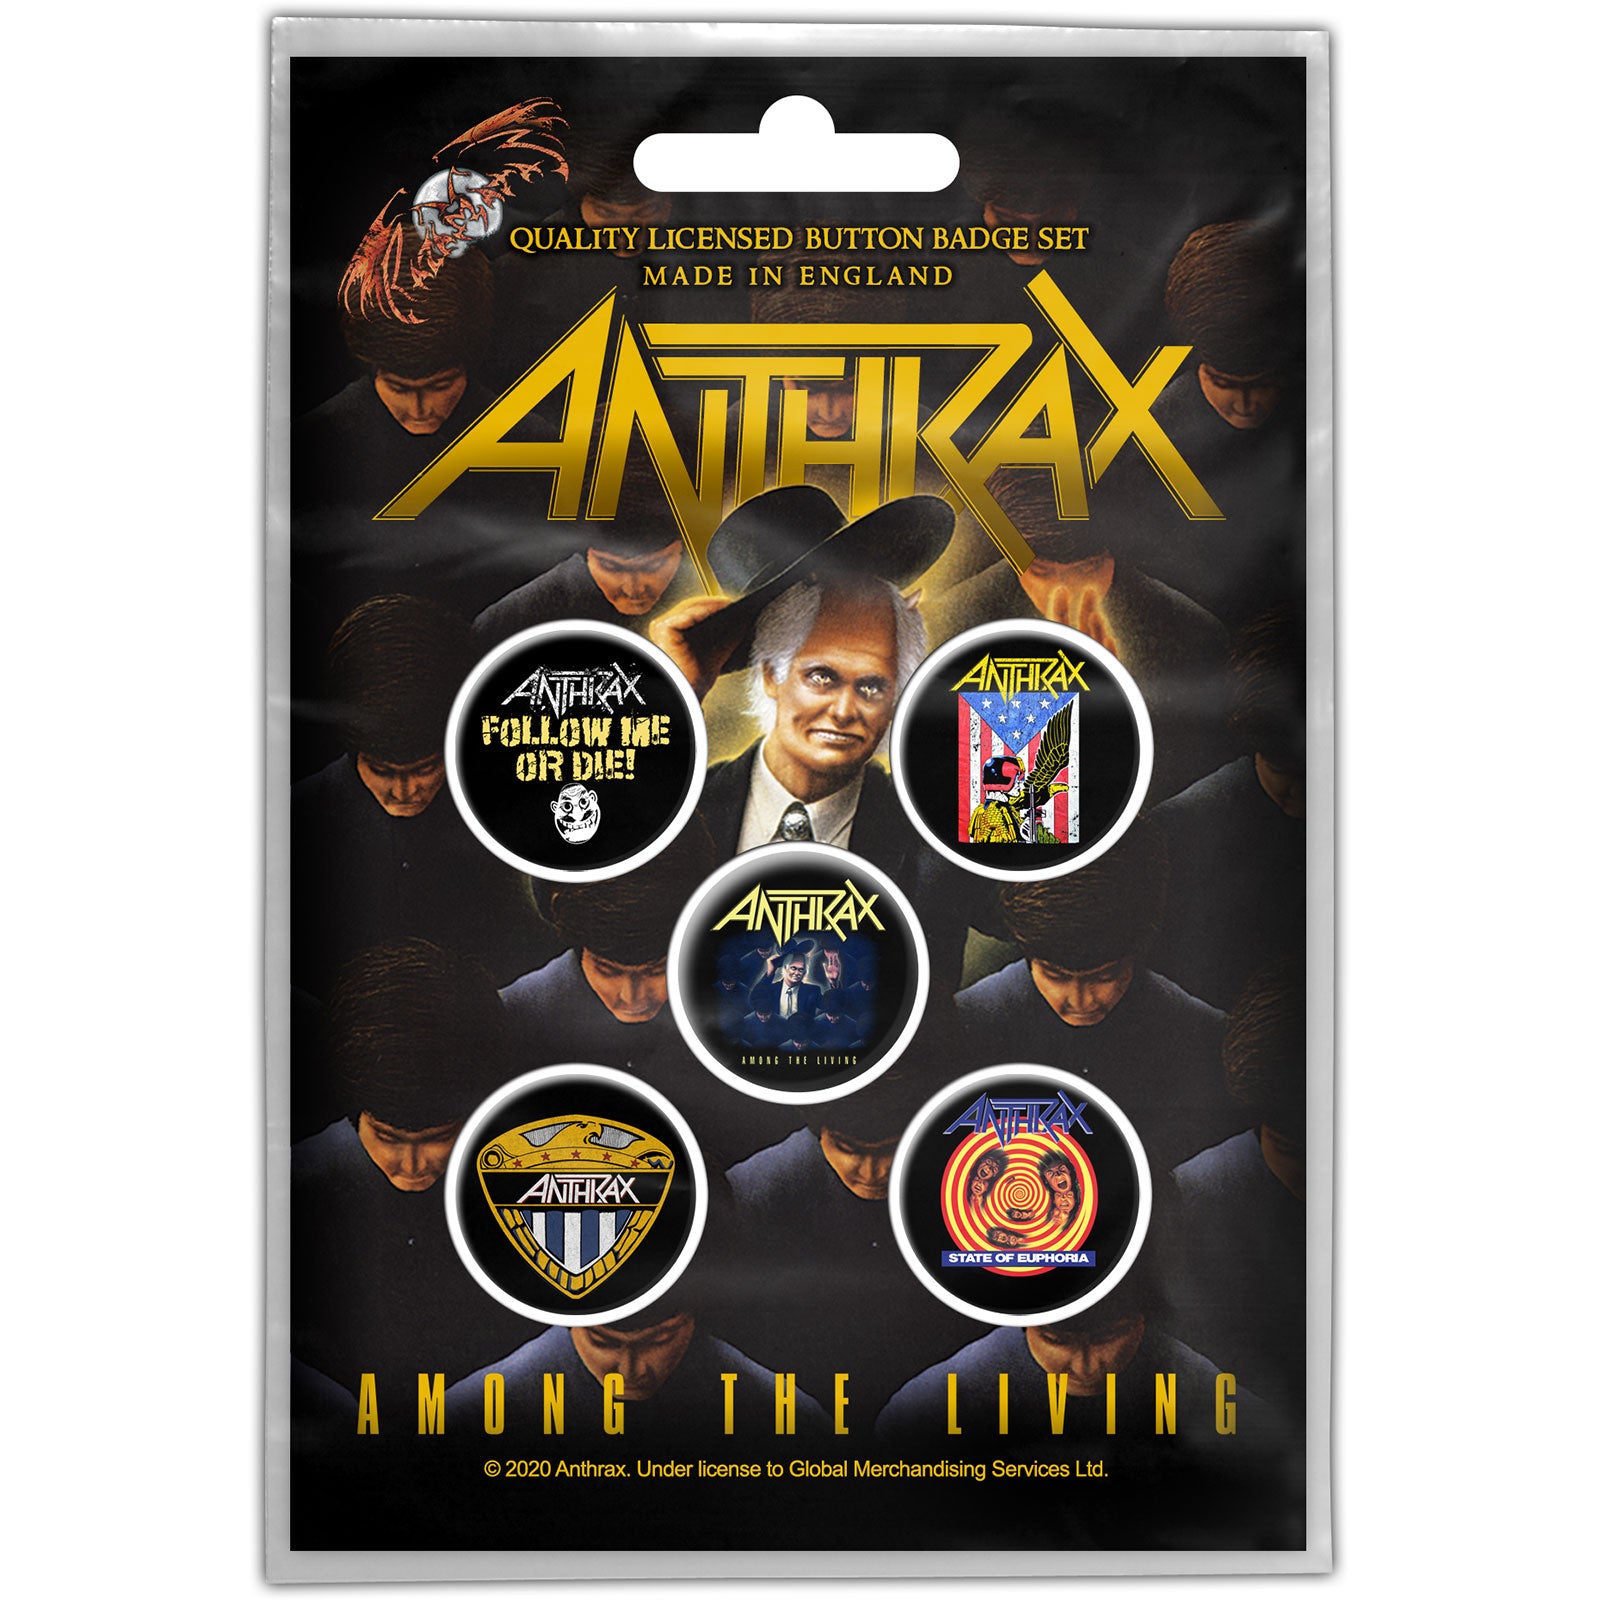 Anthrax Button Badge Pack: Among the Living (Retail Pack)